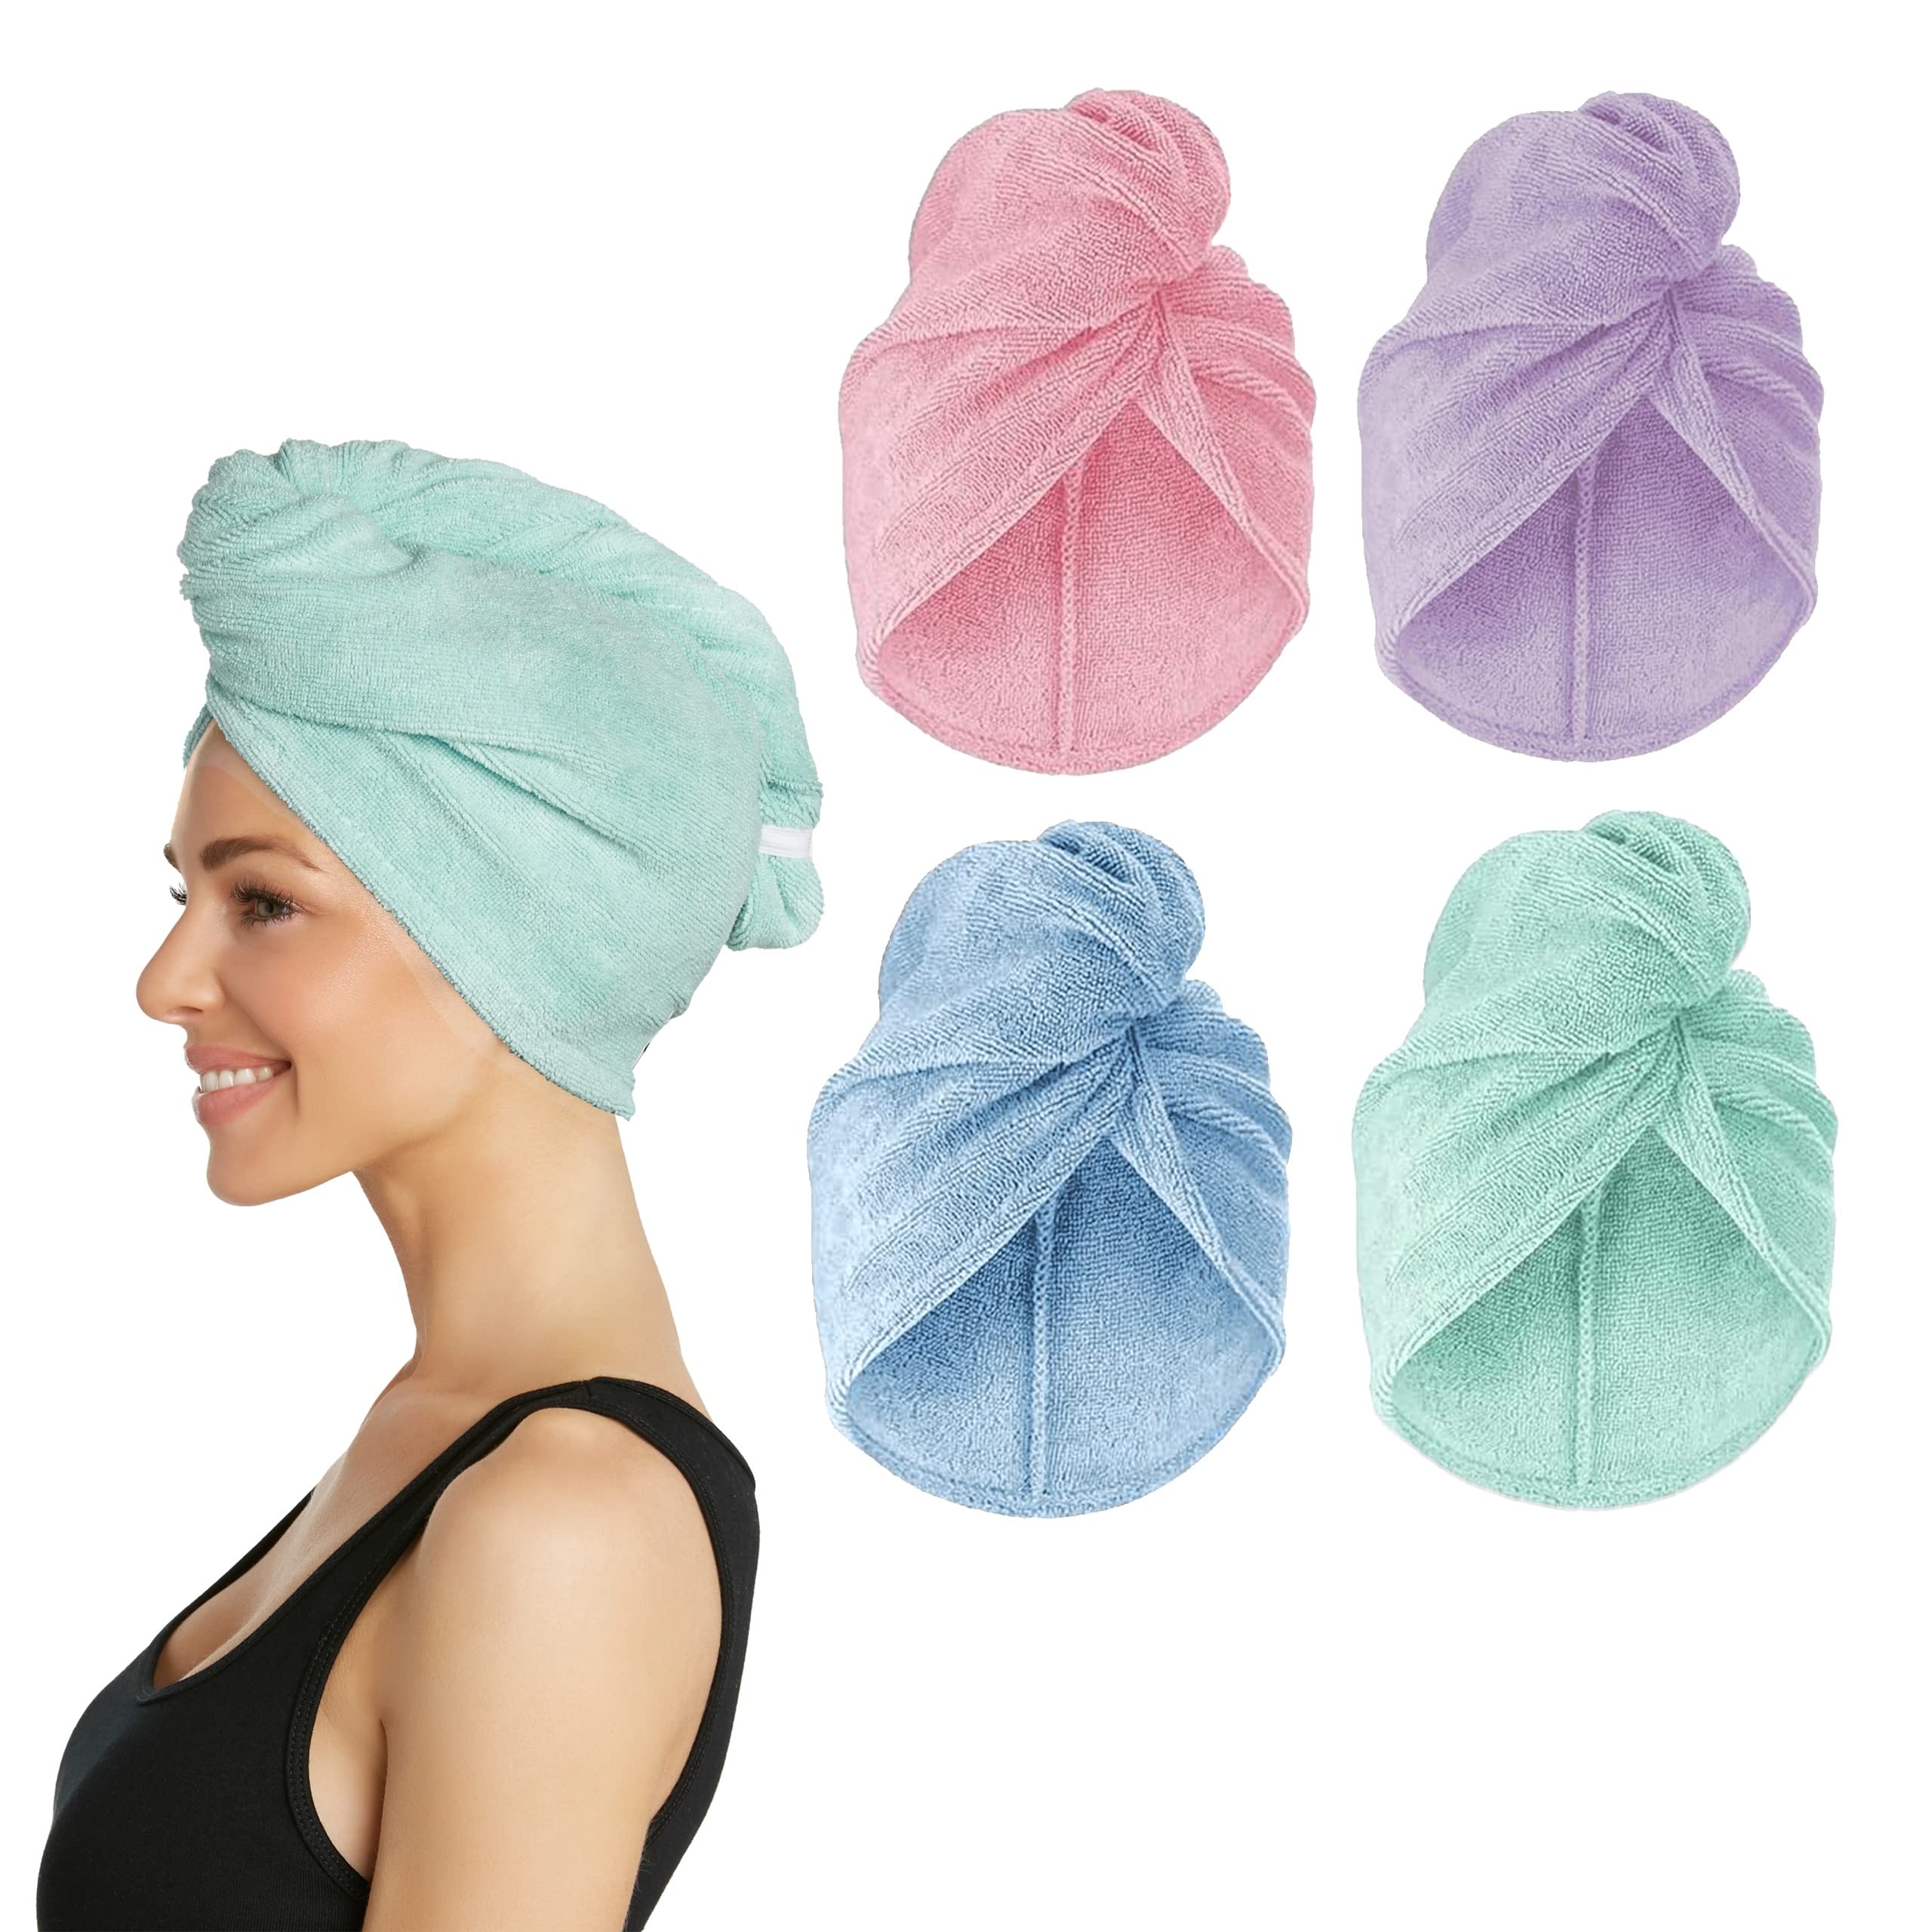 Turbie Twist Microfiber Hair Towel Wrap for Women and Men | 4 Pack | Quick Dry Turban for Drying Curly, Long & Thick Hair (Pink, Purple, Blue, Aqua)